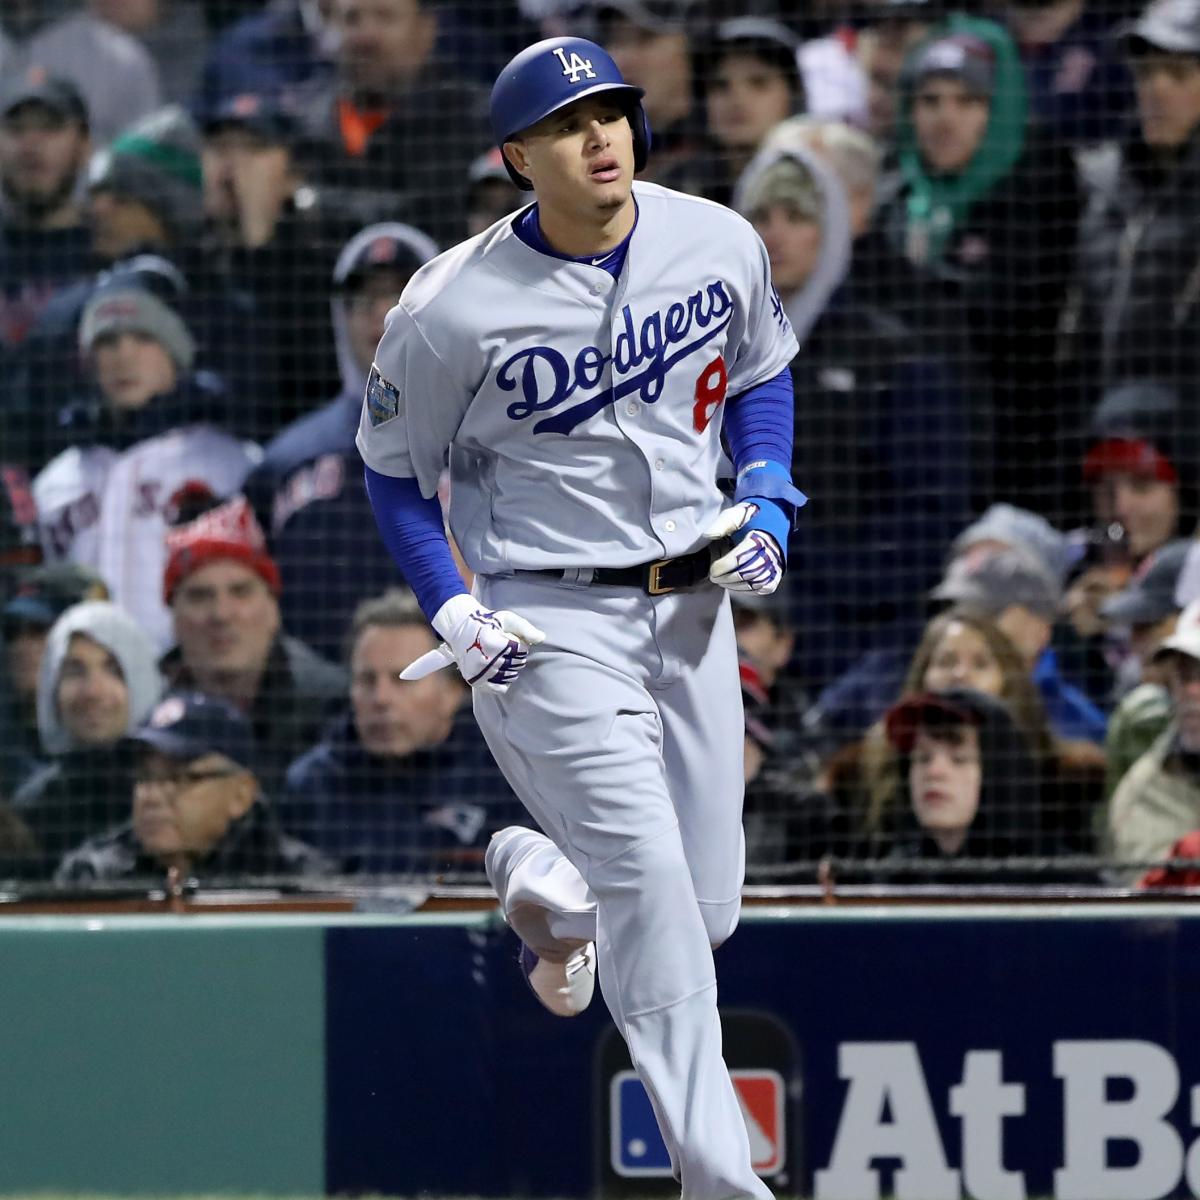 Manny Machado will start for Dodgers on Friday